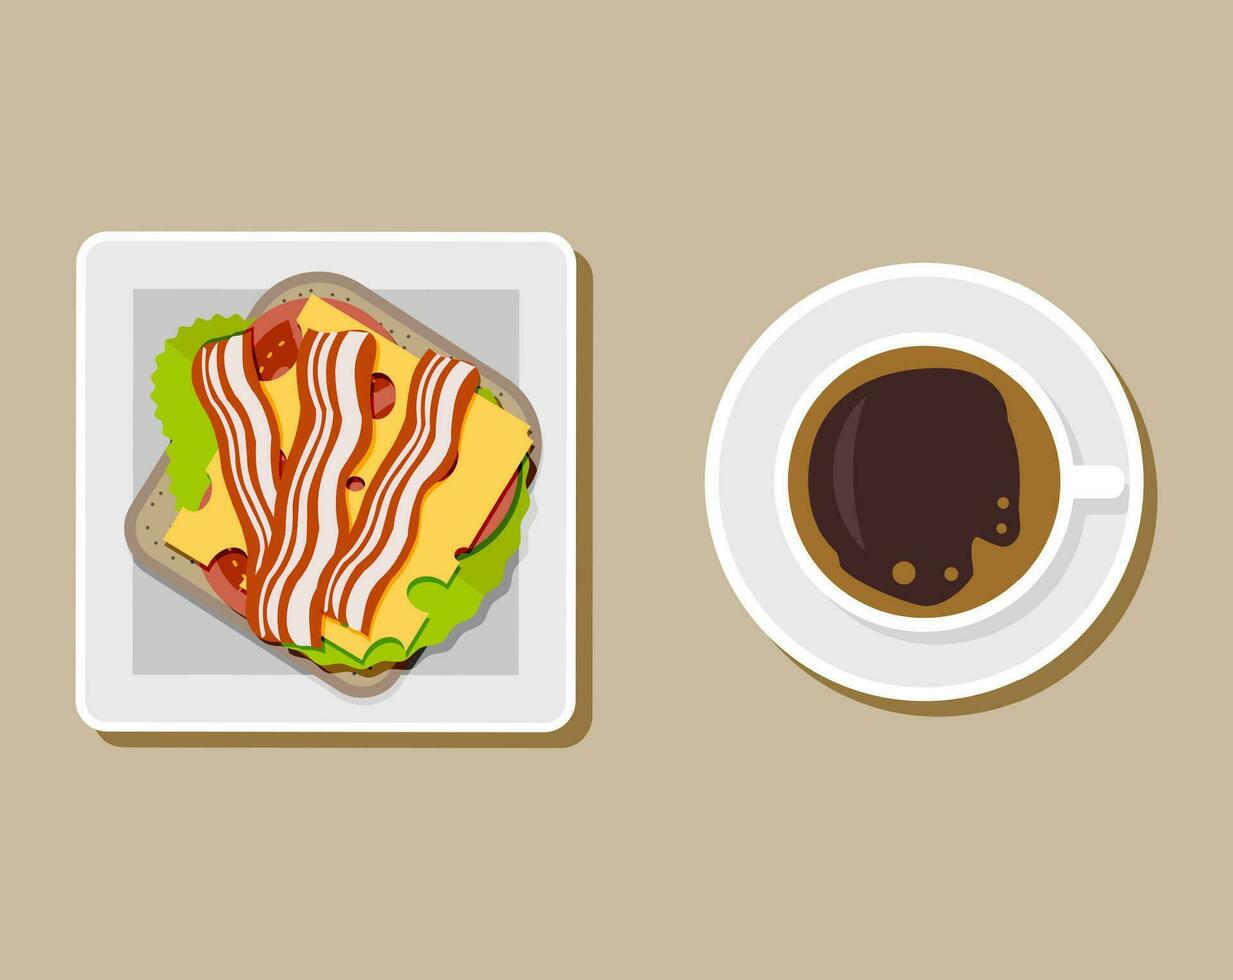 Coffee cup with sandwich top view, coffee break, breakfast meal, fast food snack, burger and tea mug on plate. cheese, tomato. bread, ham, salad. vector illustration in flat style on brown background